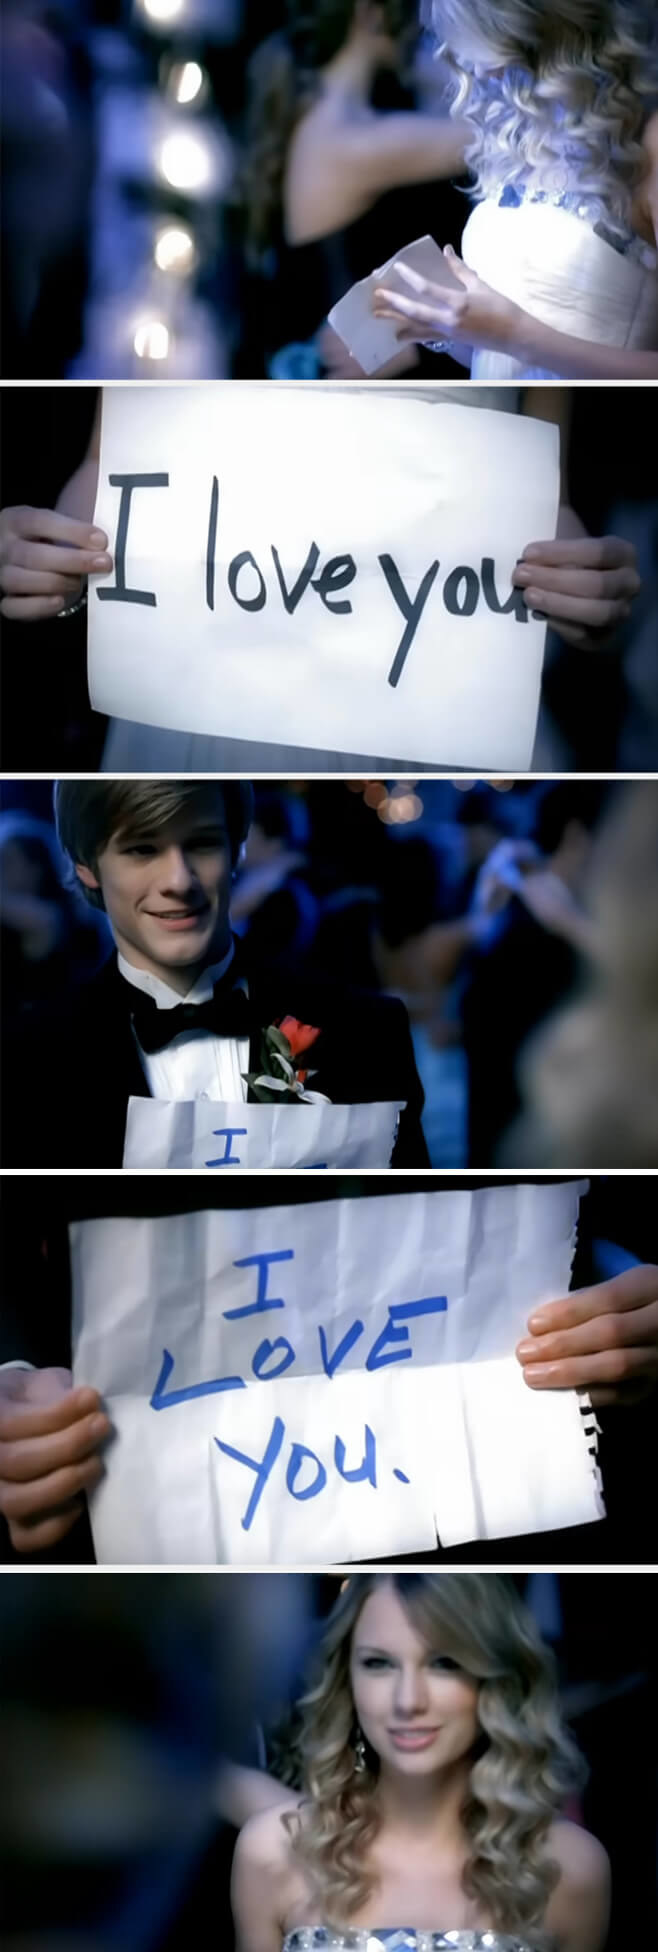 taylor getting a note that says i love you